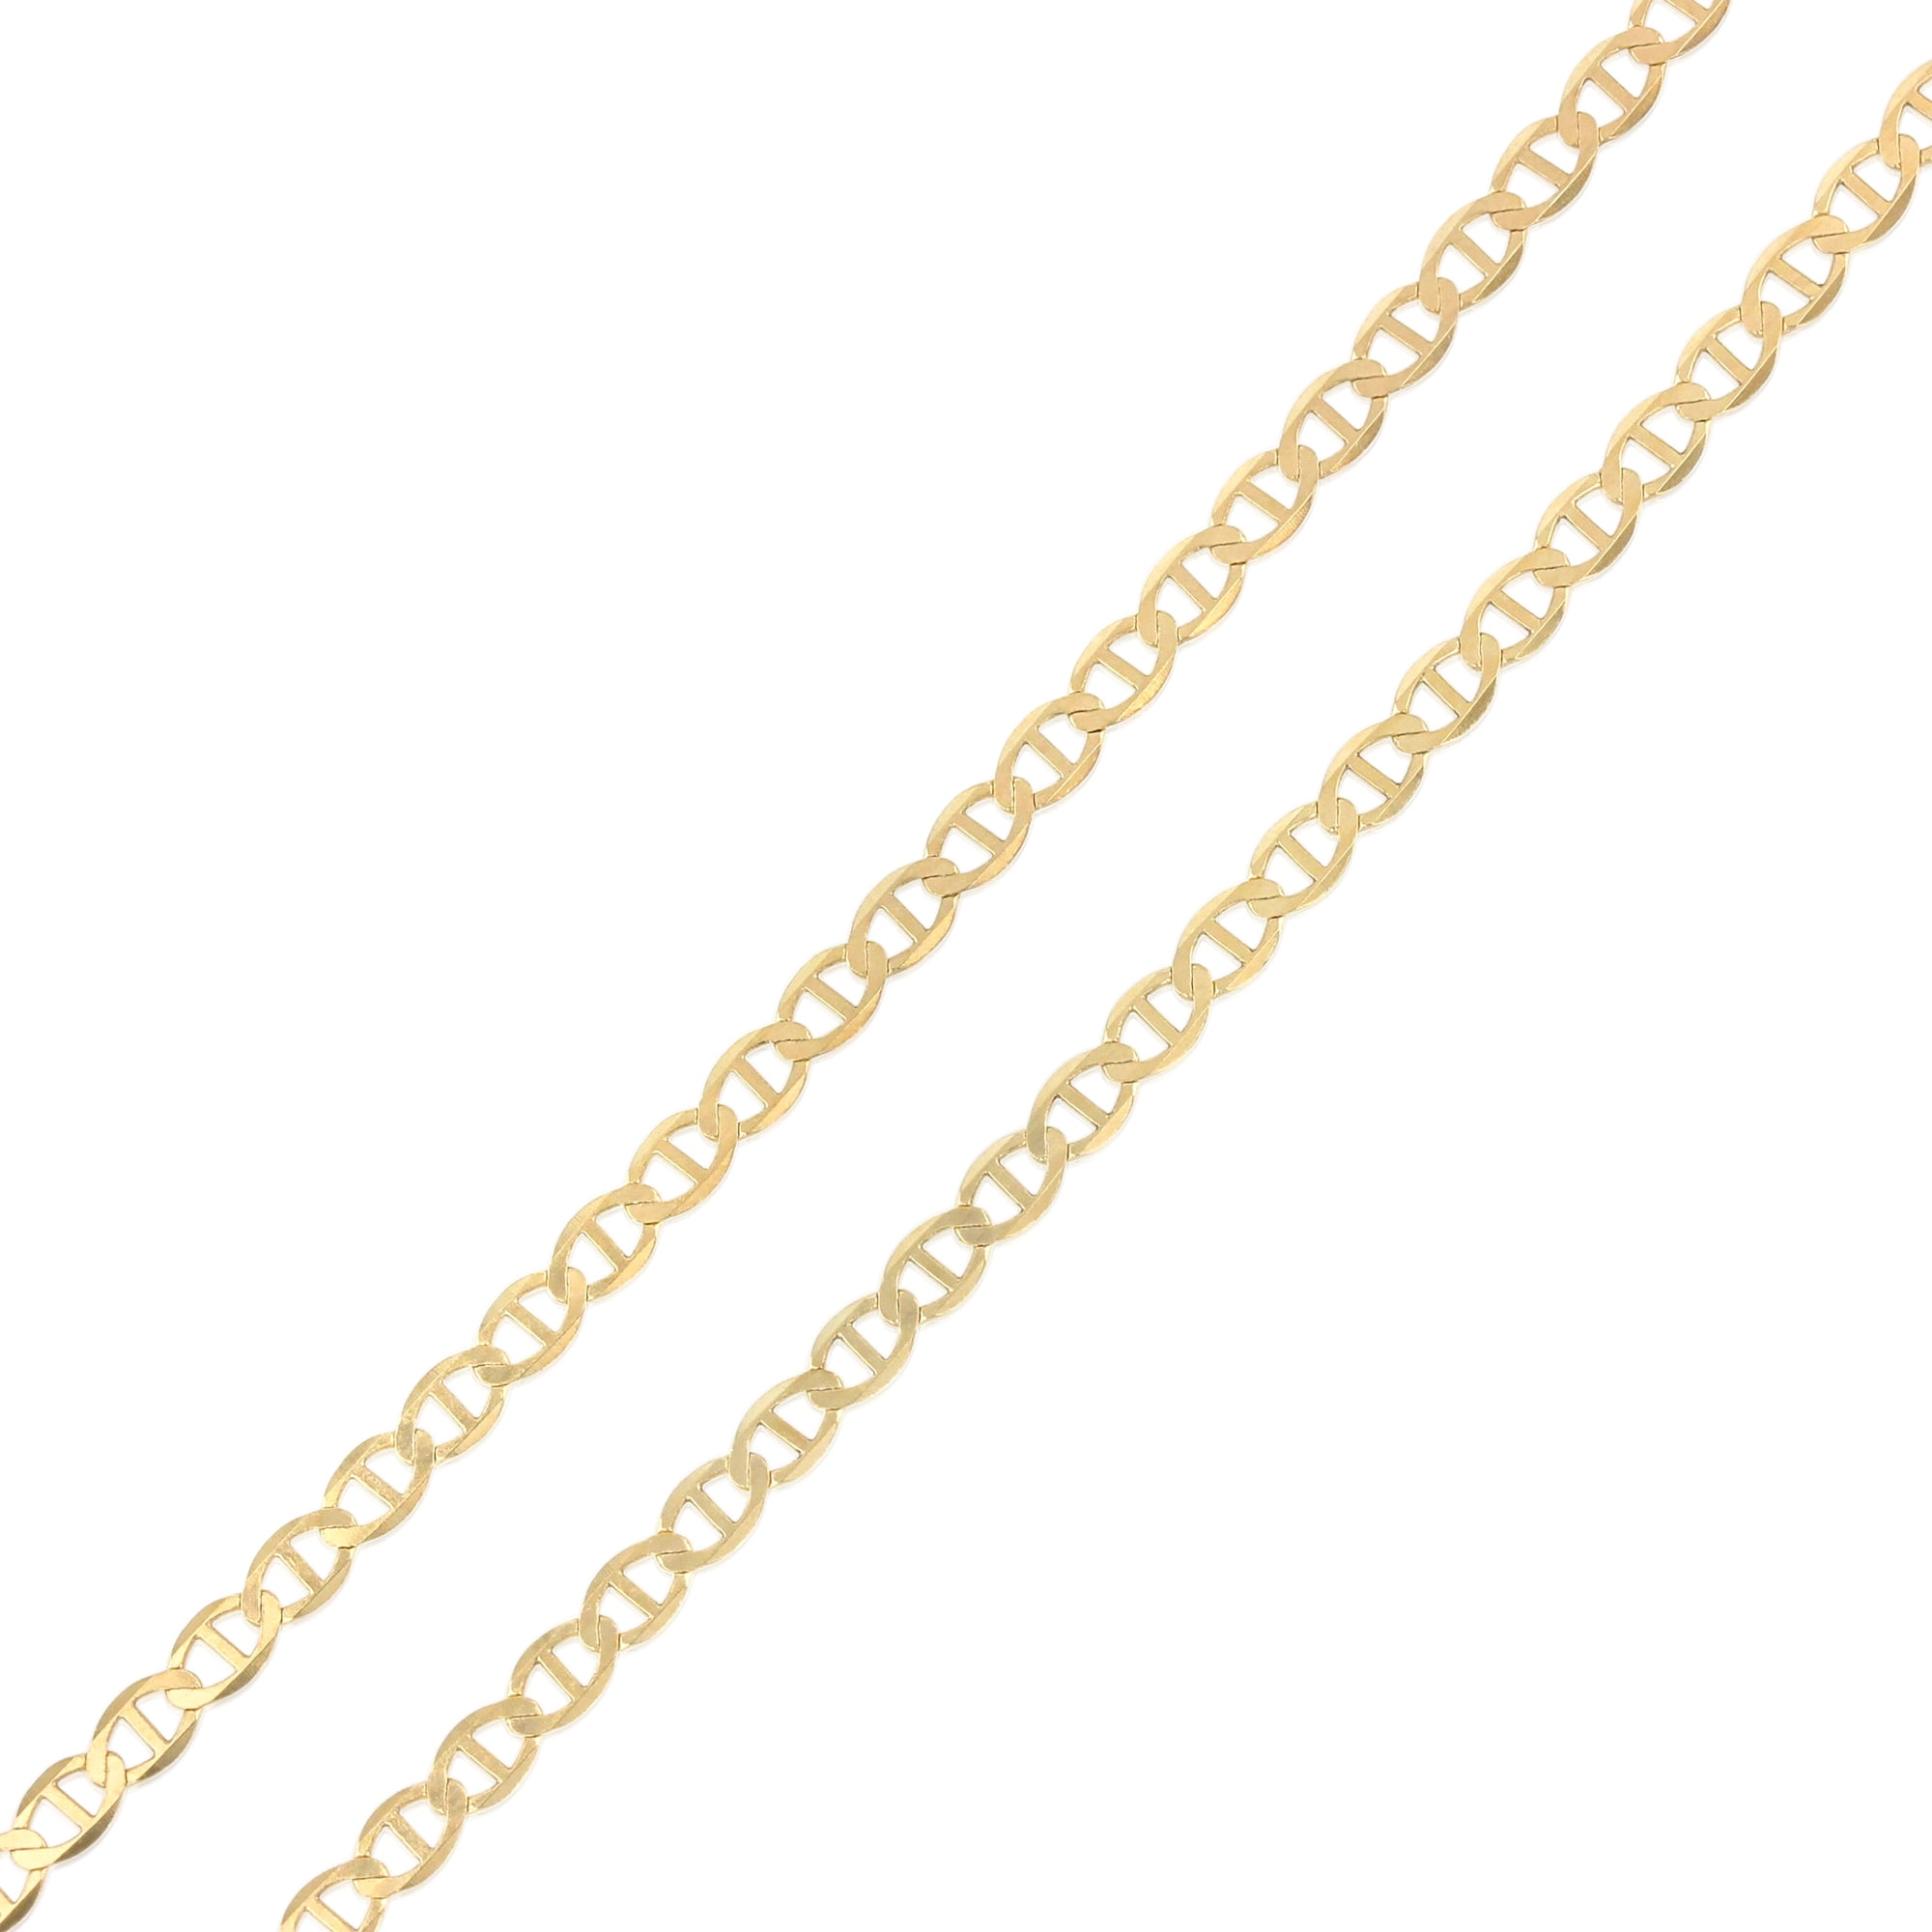 14K Yellow Solid Gold 3.4mm Flat Mariner Chain Necklace with Lobster Clasp Ioka